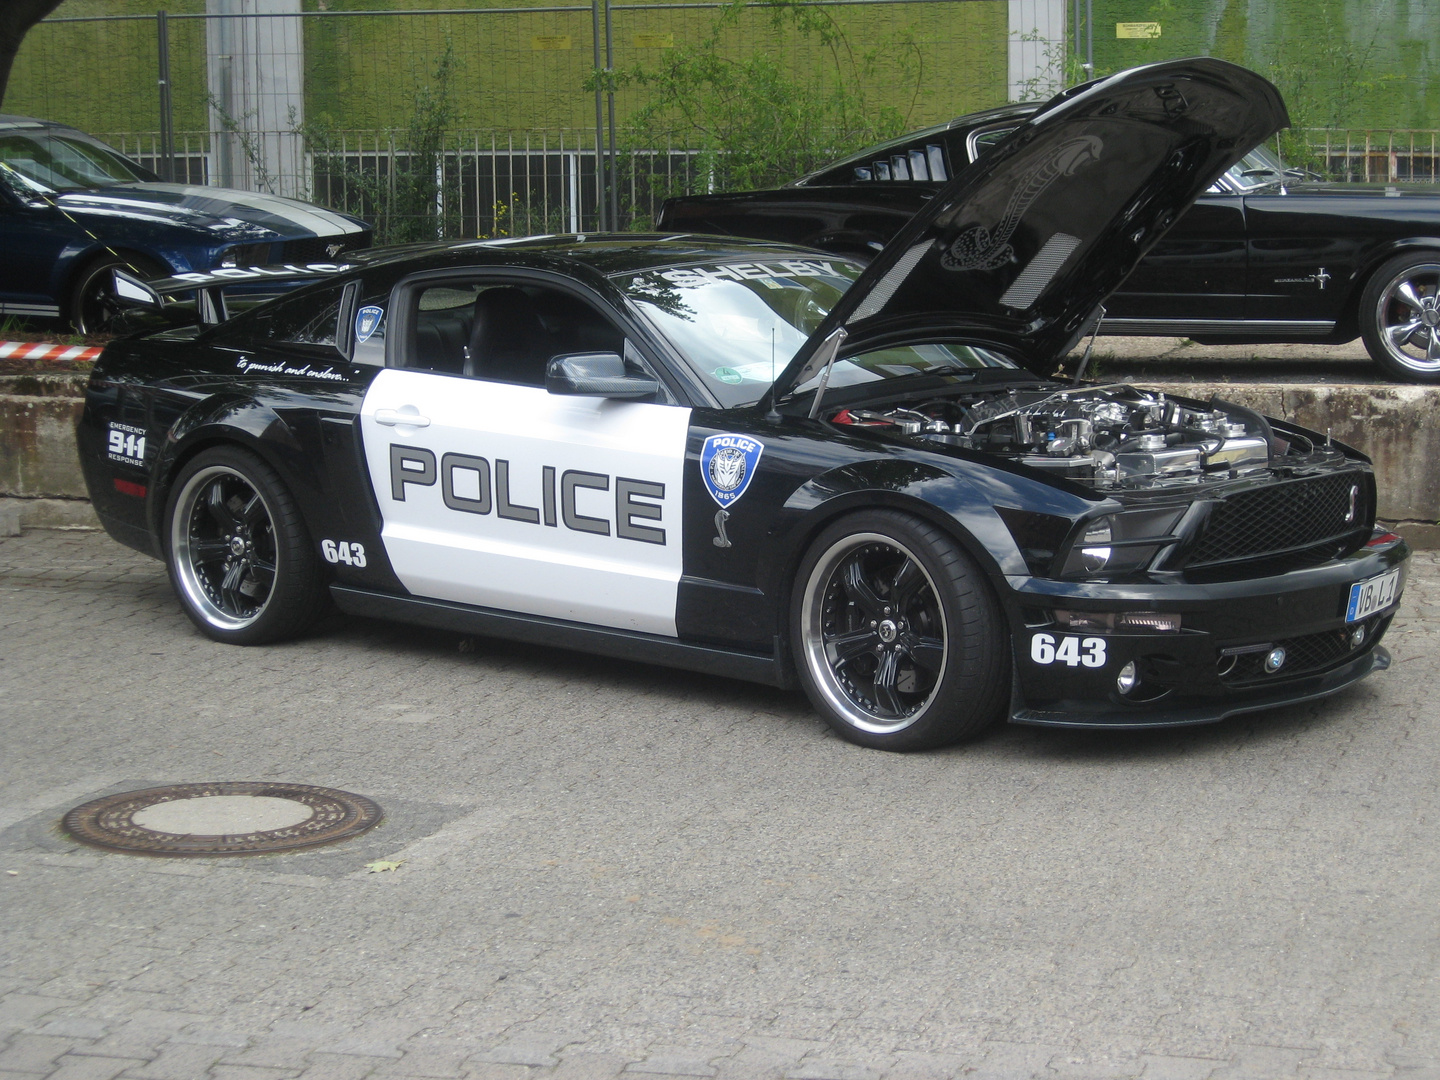 2012 Ford Mustang Treffen in der Classic-Stadt-Ffm - Clon POLICE FORD MUSTANG GT 500 -